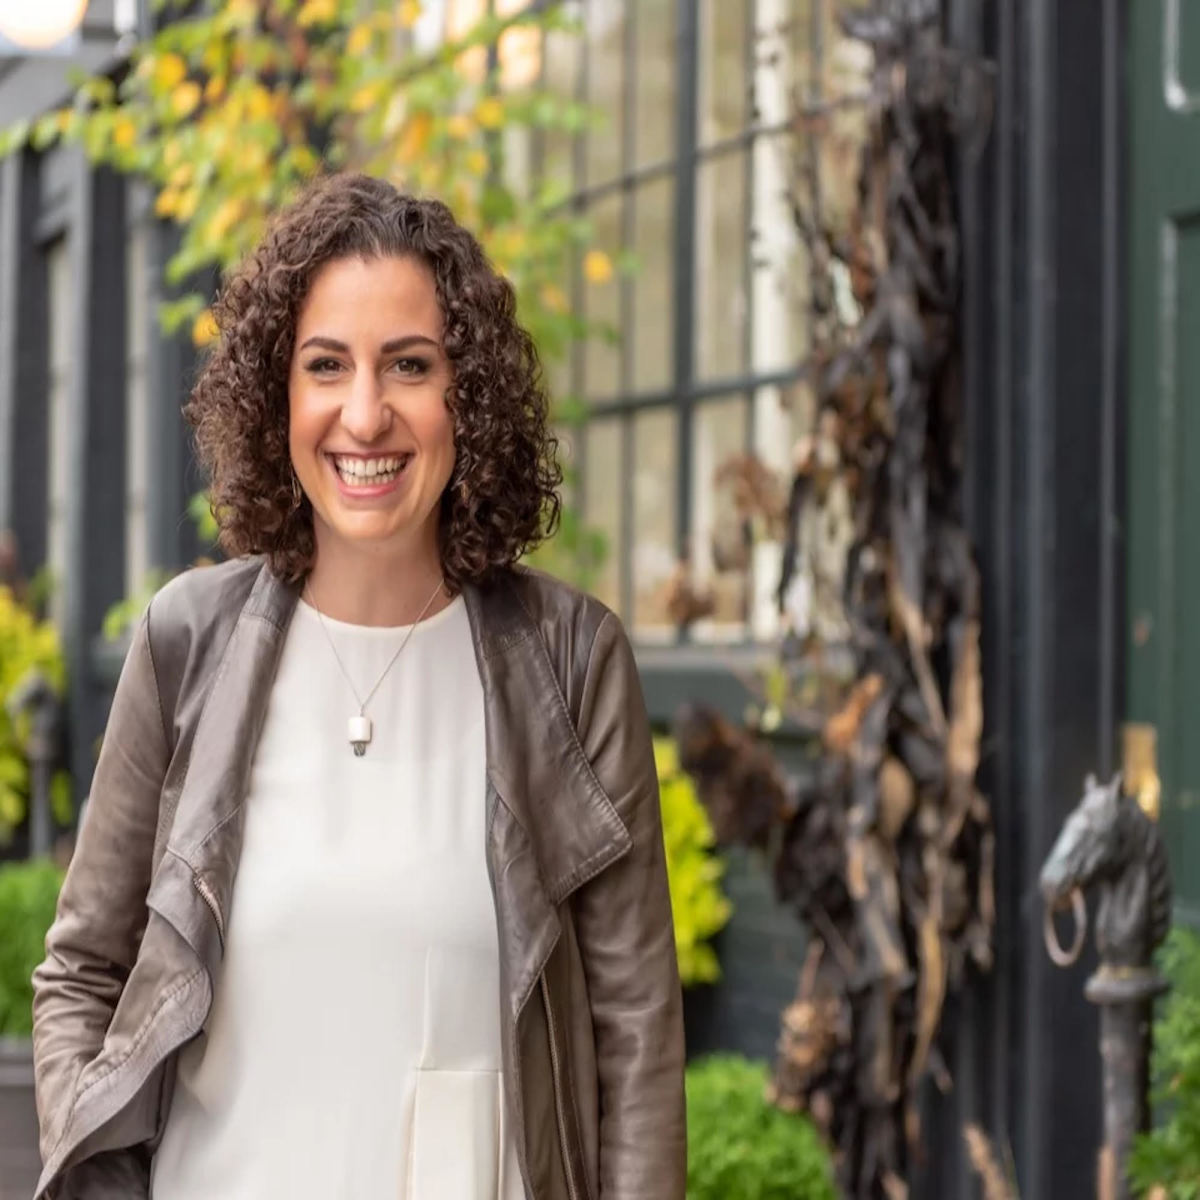 Marisa Rothstein, JD, CFP ® , launched Siena Private Wealth, a Member of Advisory Services Network, LLC to help clients achieve financial wellbeing through personalized financial planning and custom portfolio management.